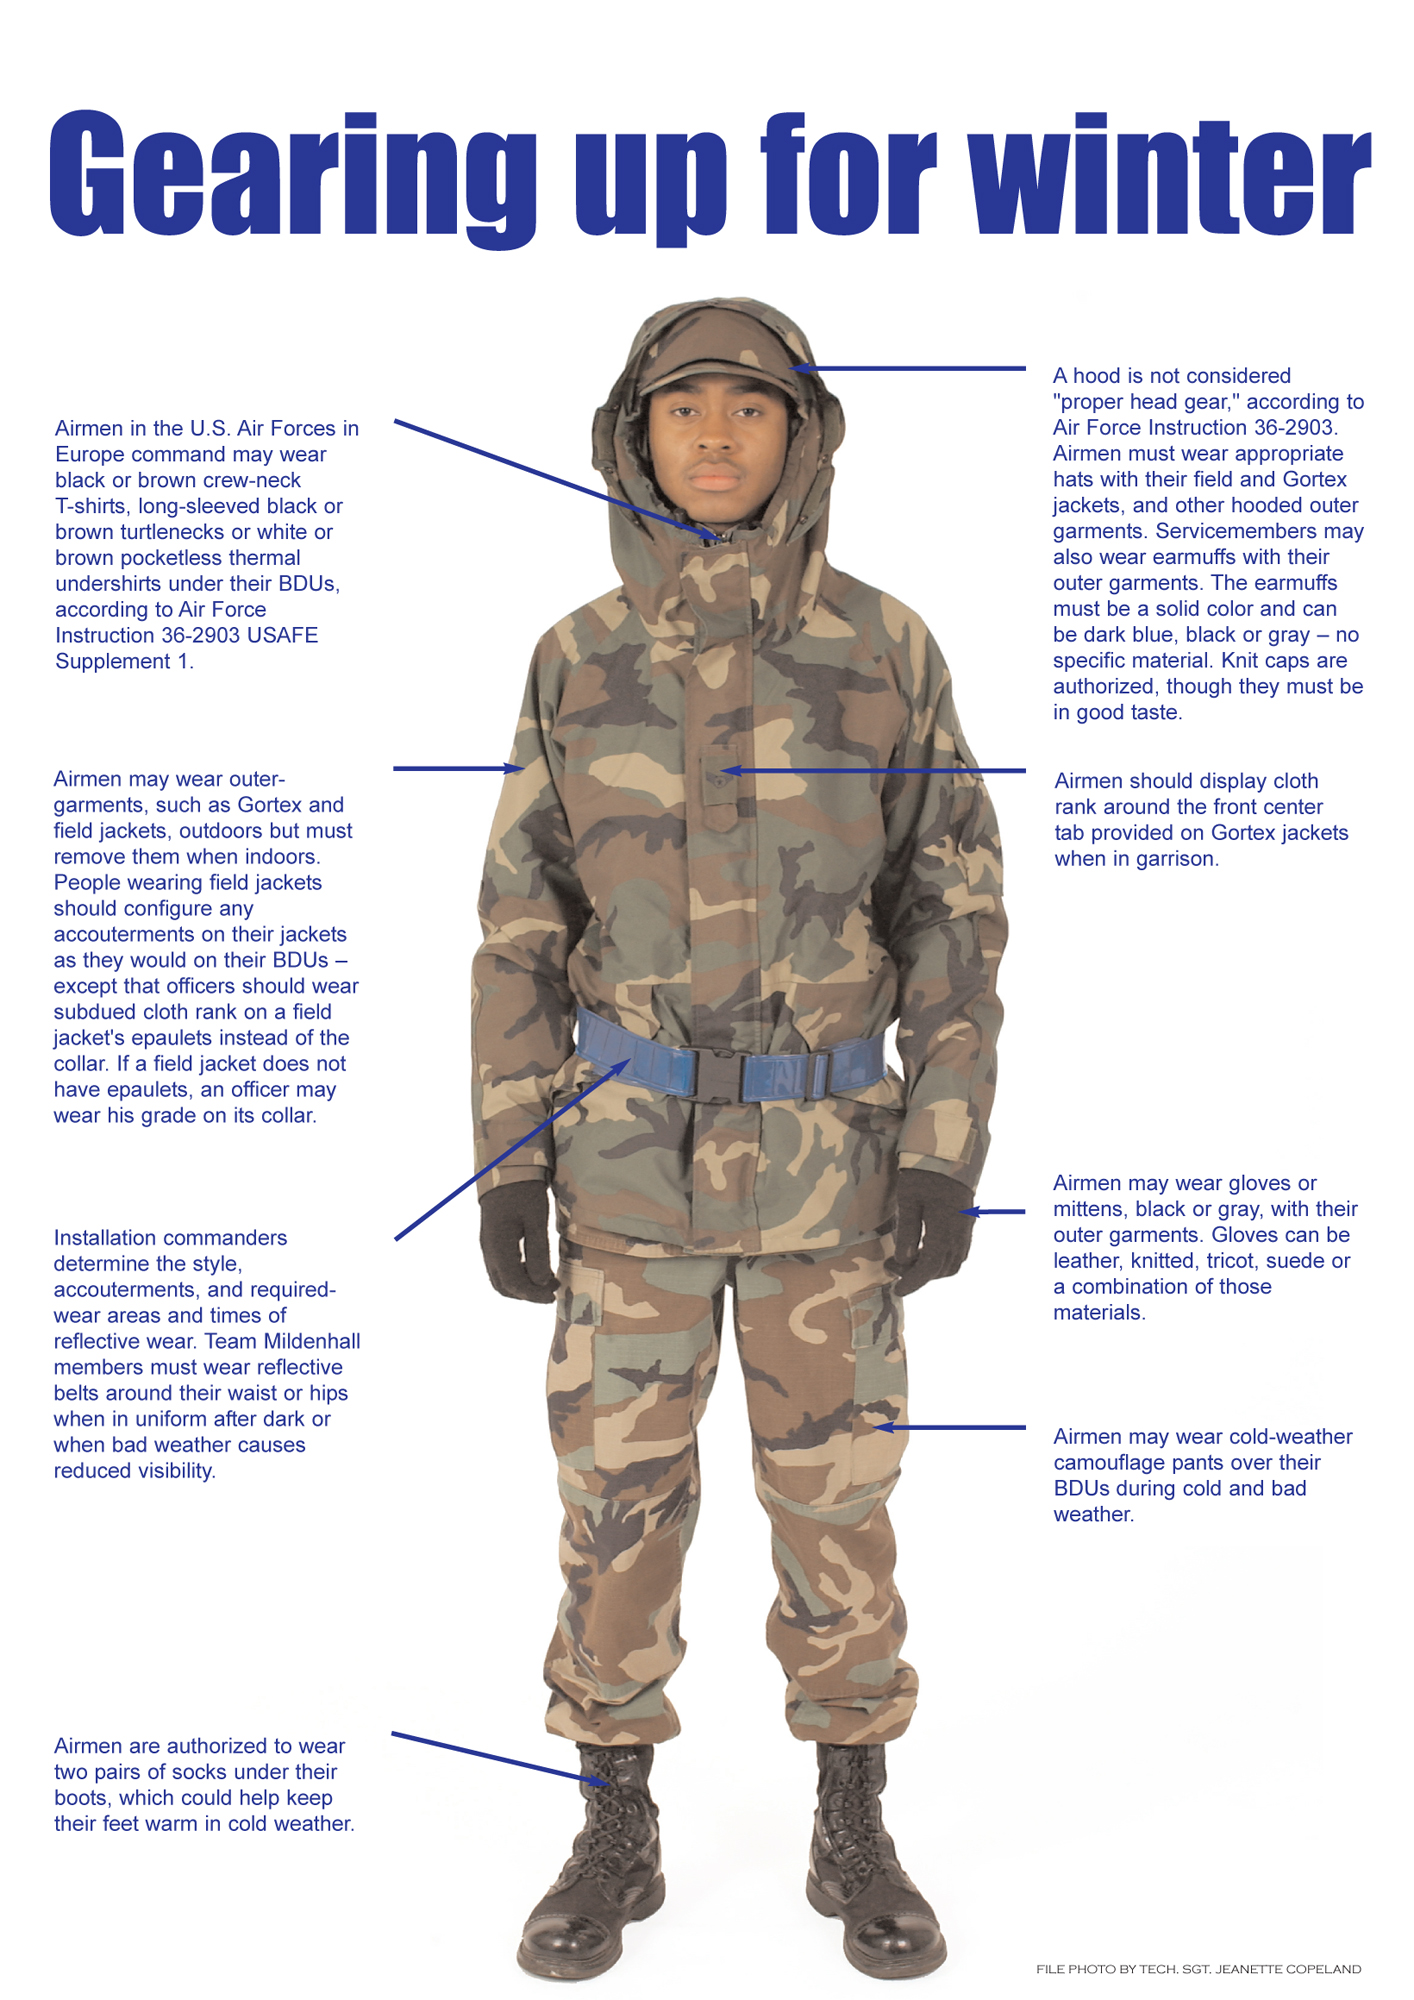 Army Cold Weather Pt Uniform Regulations - Army Military